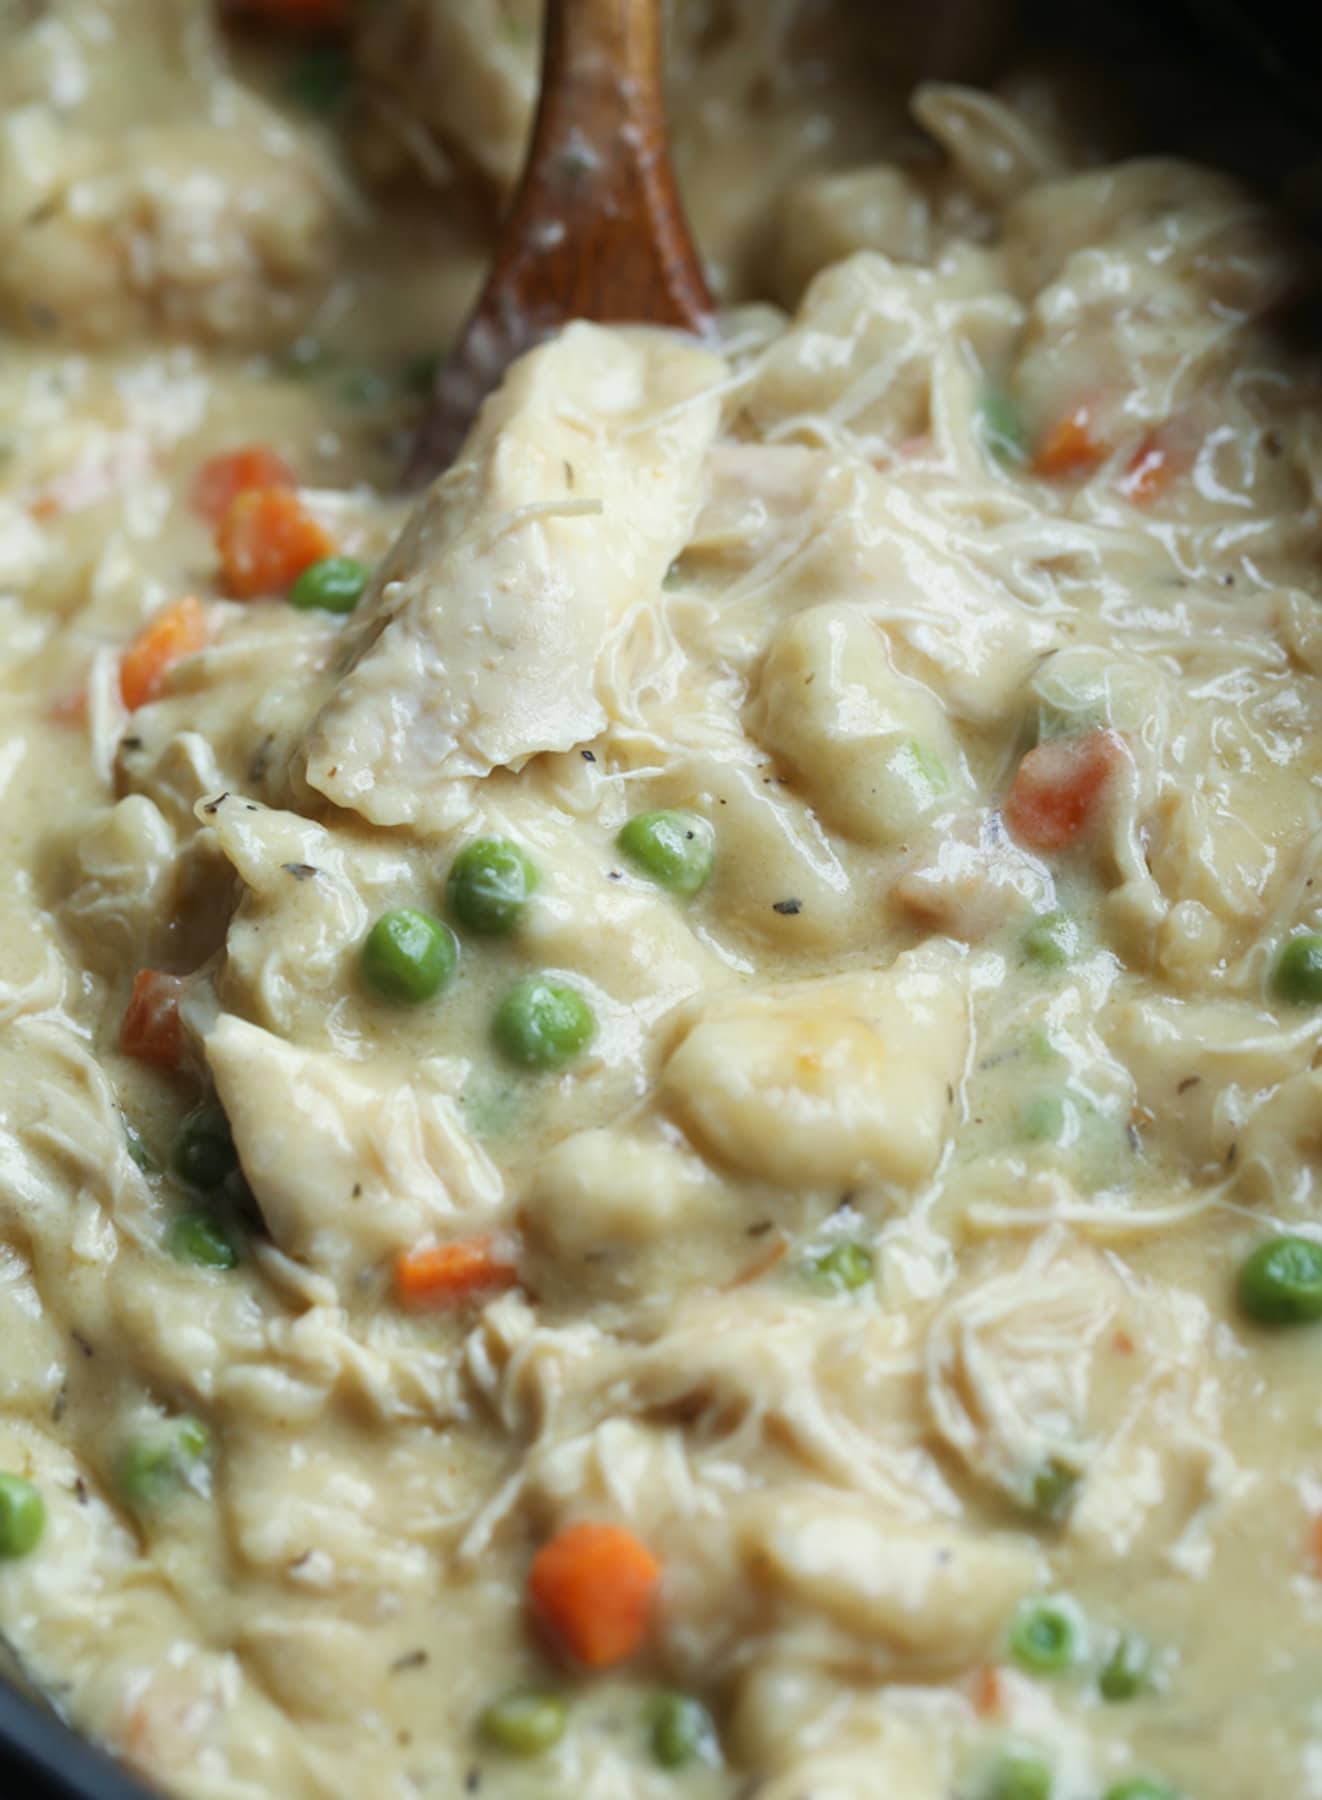 Spooning out chicken and dumplings in a Crock Pot with shredded chicken, carrots, and peas